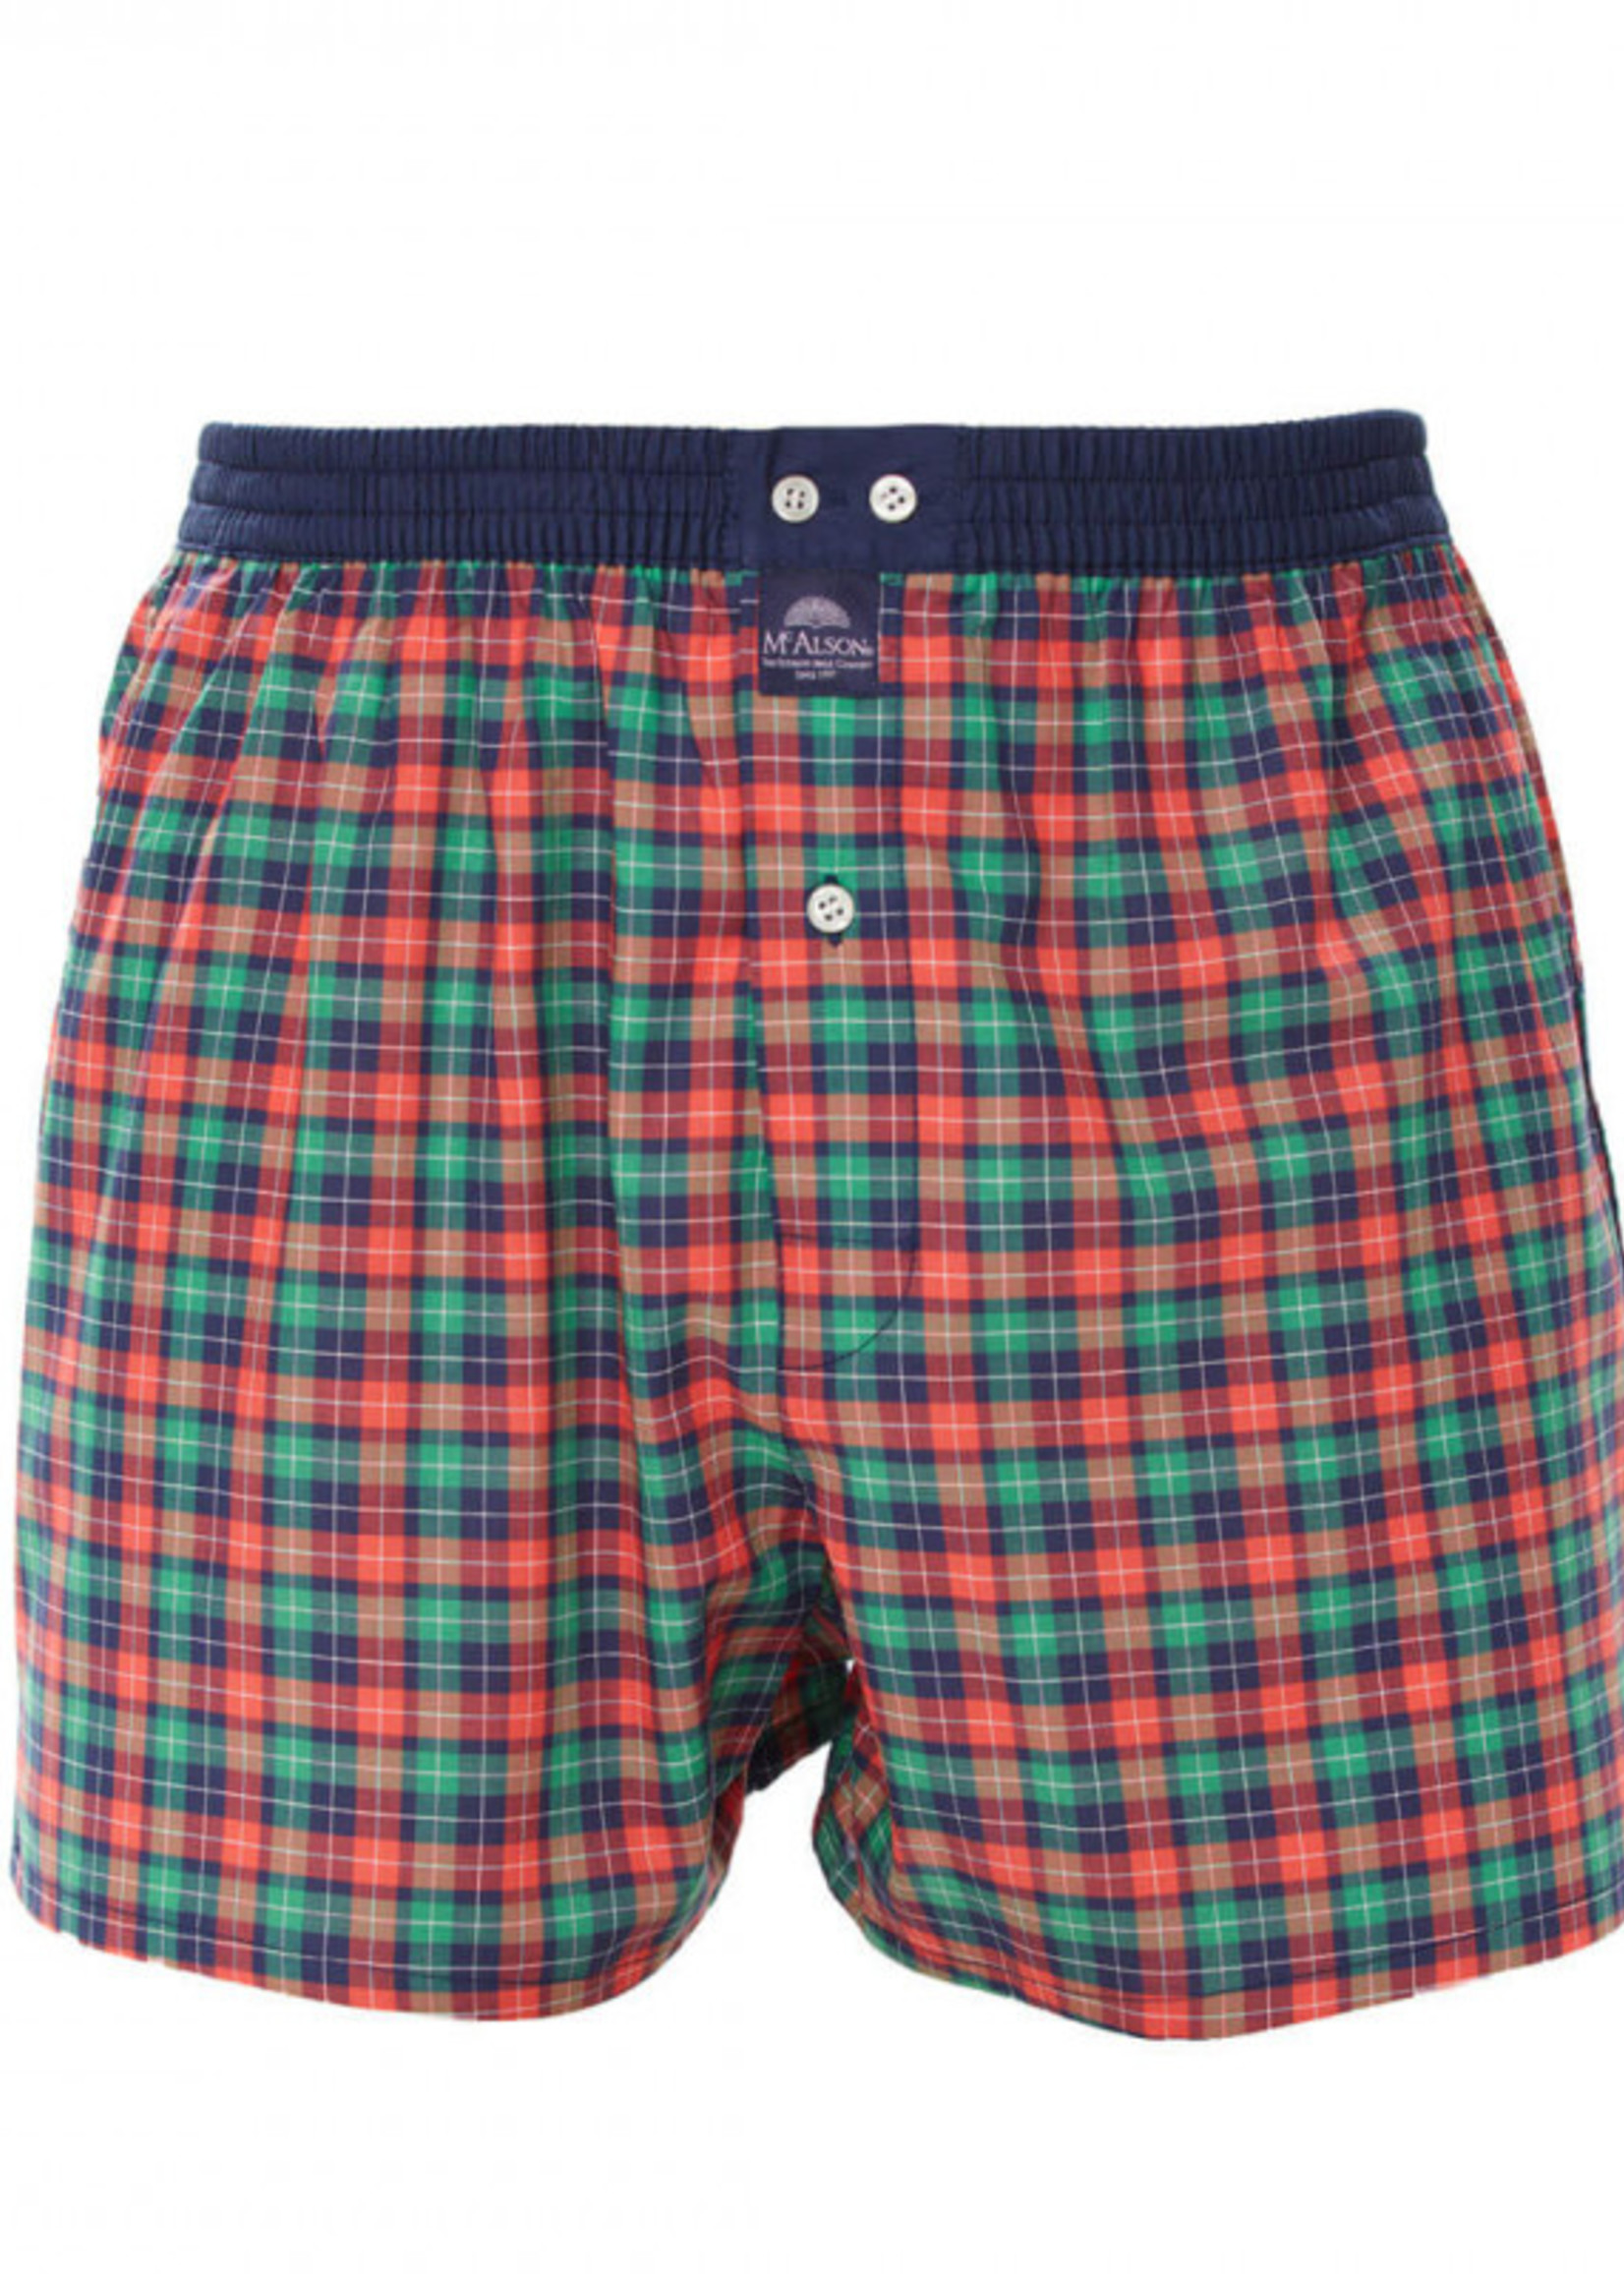 MC ALSON M4242 - Gingham red & green